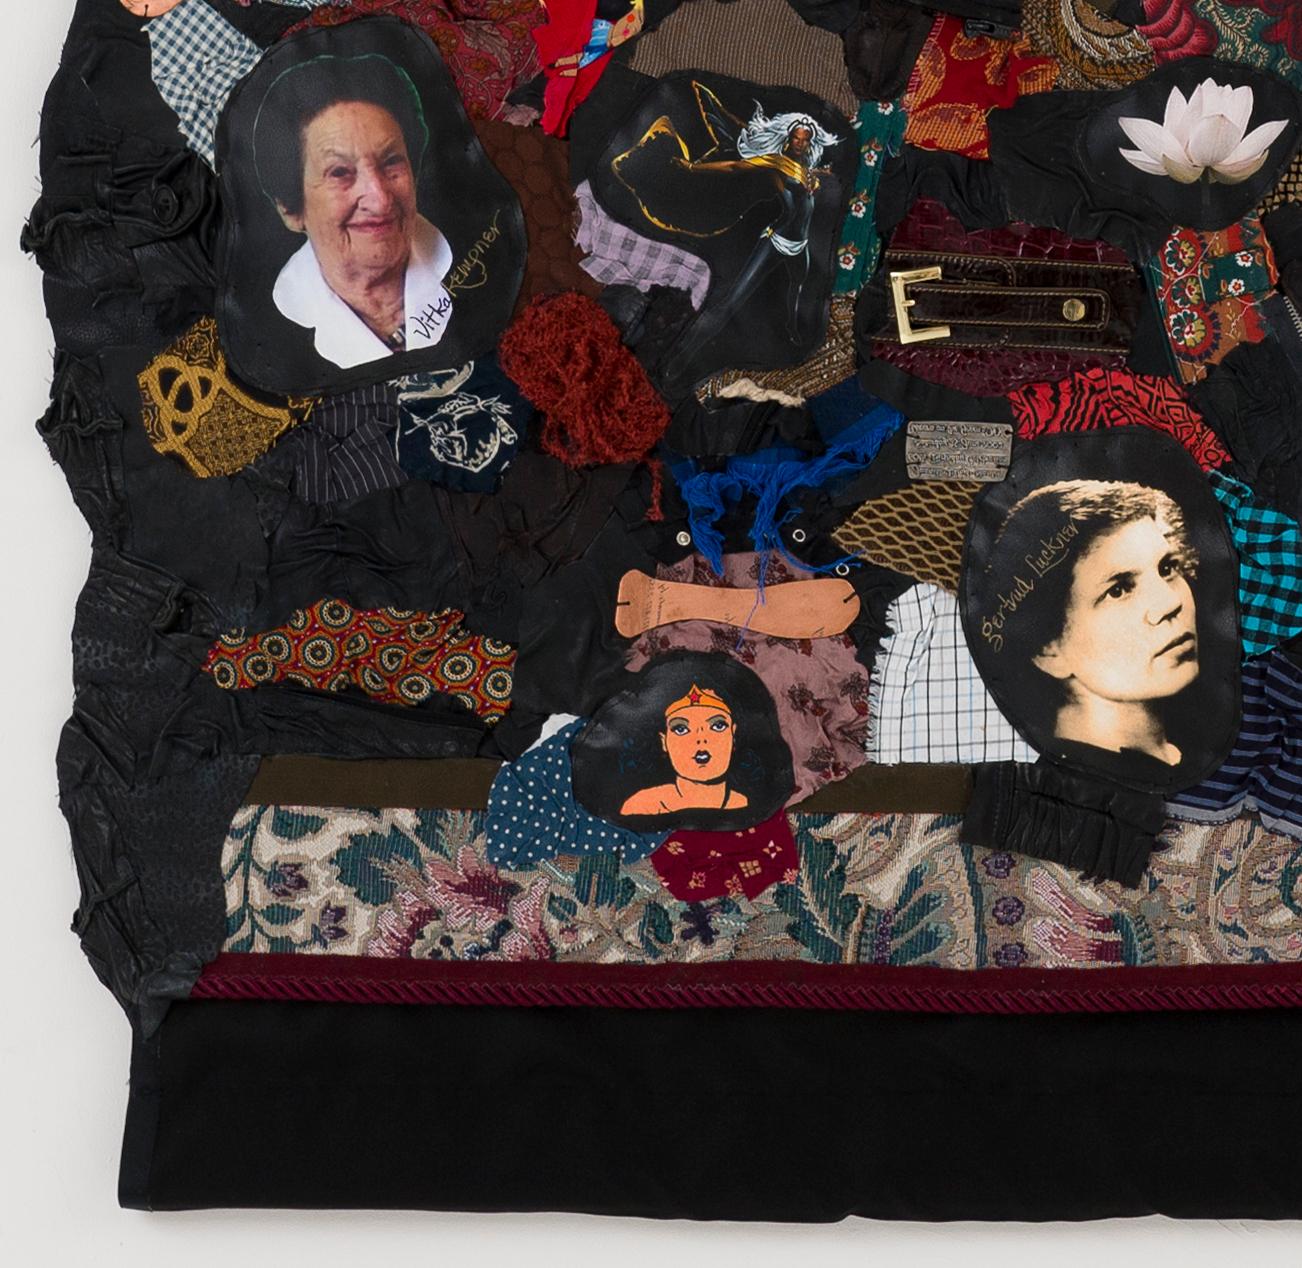 Feminist Contemporary Mixed Media Fabric Sculptural Tapestry - Ten Heroes 882  - Brown Figurative Sculpture by Linda Stein